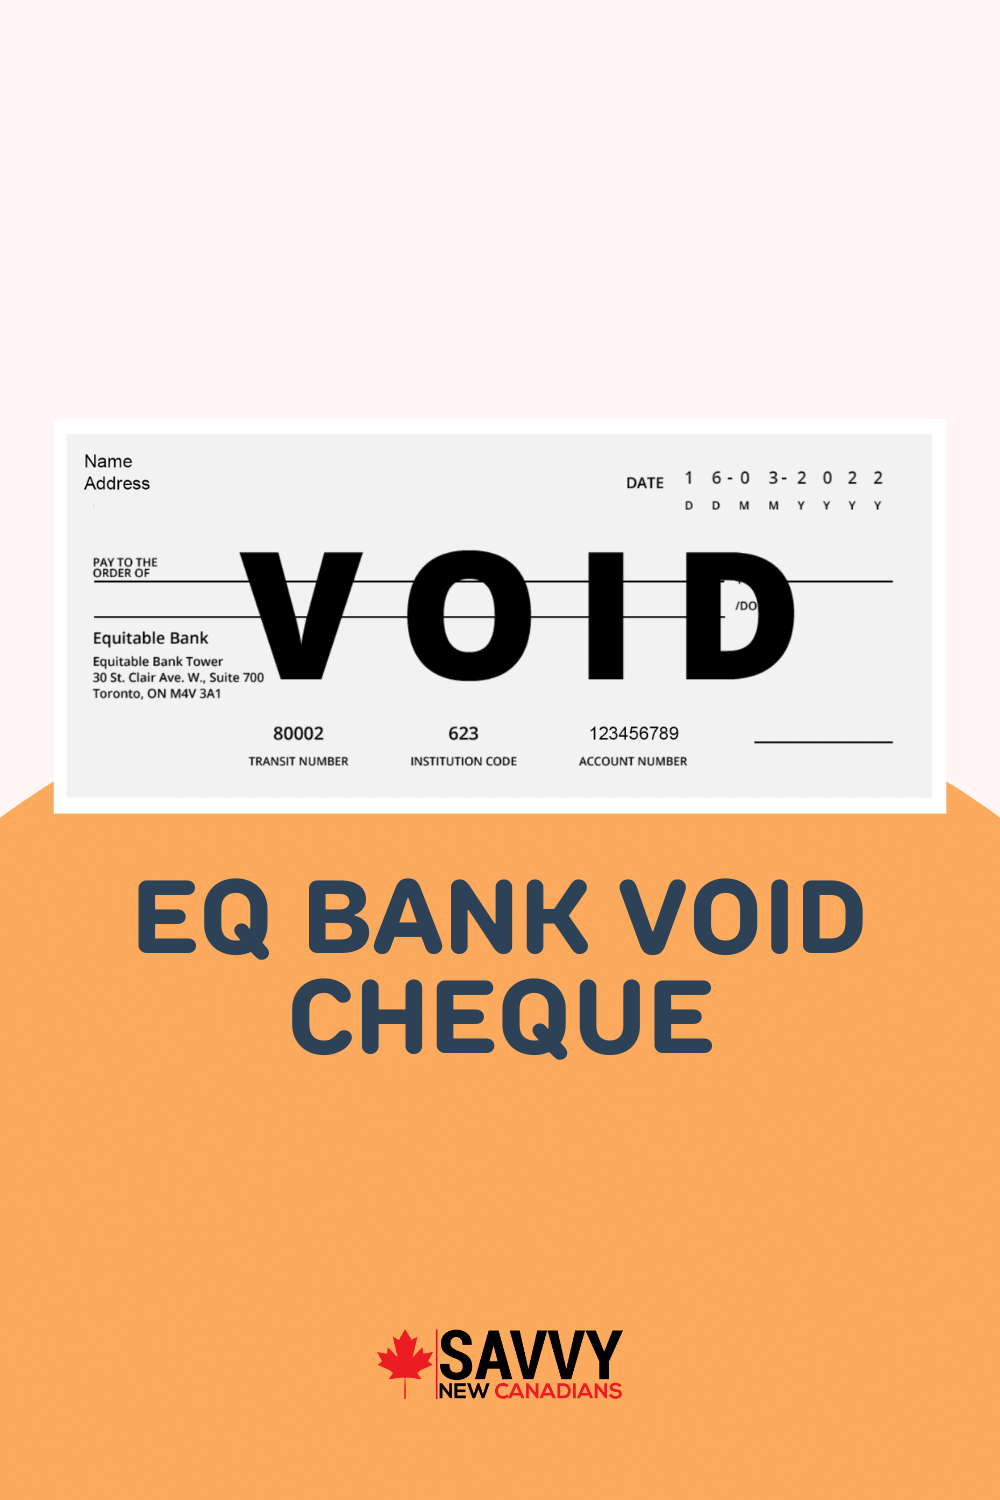 EQ Bank Void Cheque: How To Setup Direct Deposits in 2022